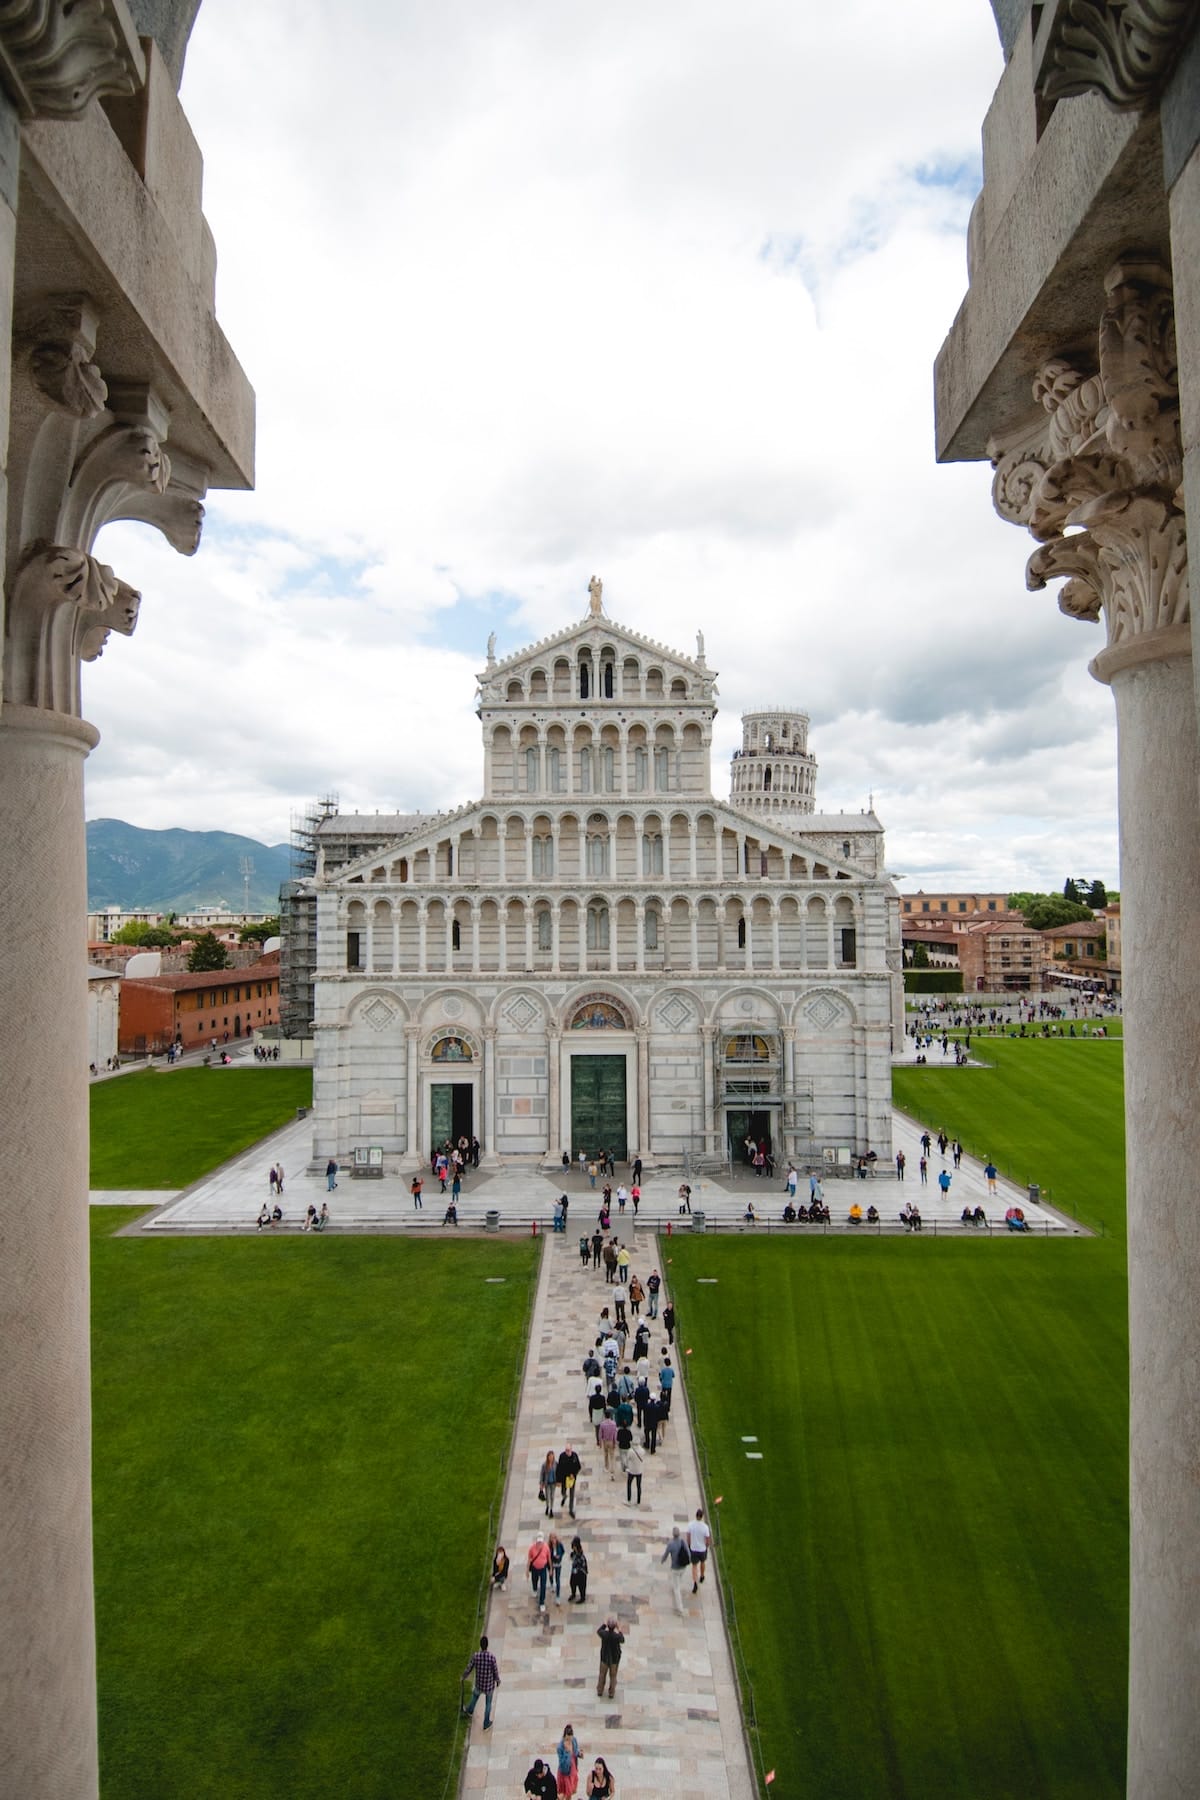 an aerial view of a building in Pisa, Italy with people walking nearby